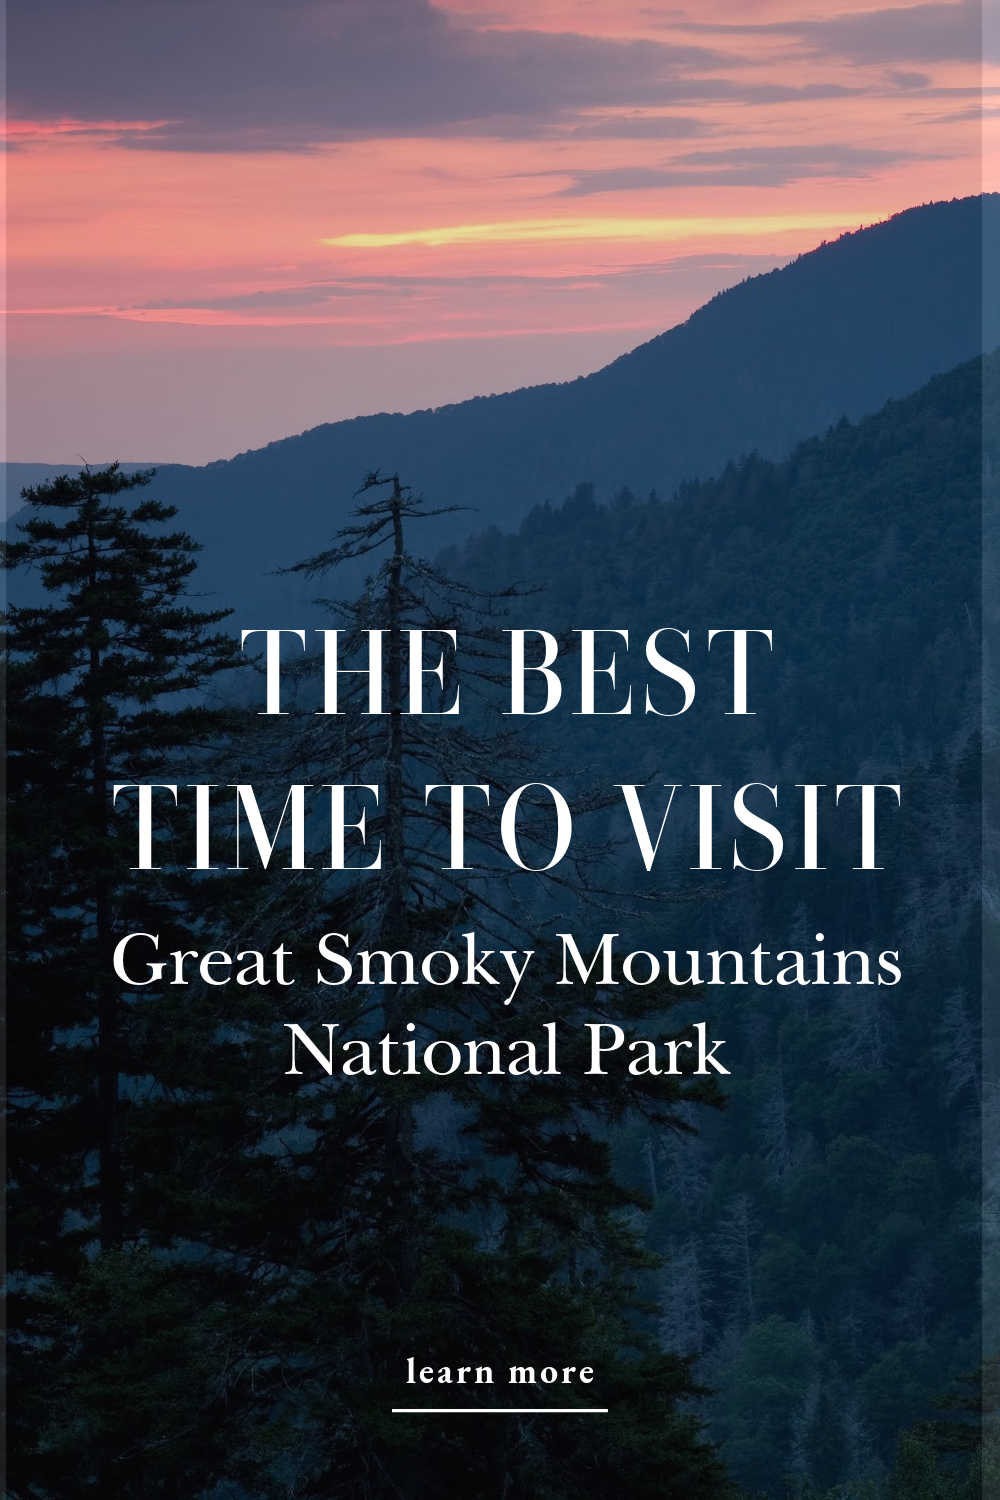 BEST TIME TO VISIT GREAT SMOKY MOUNTAINS